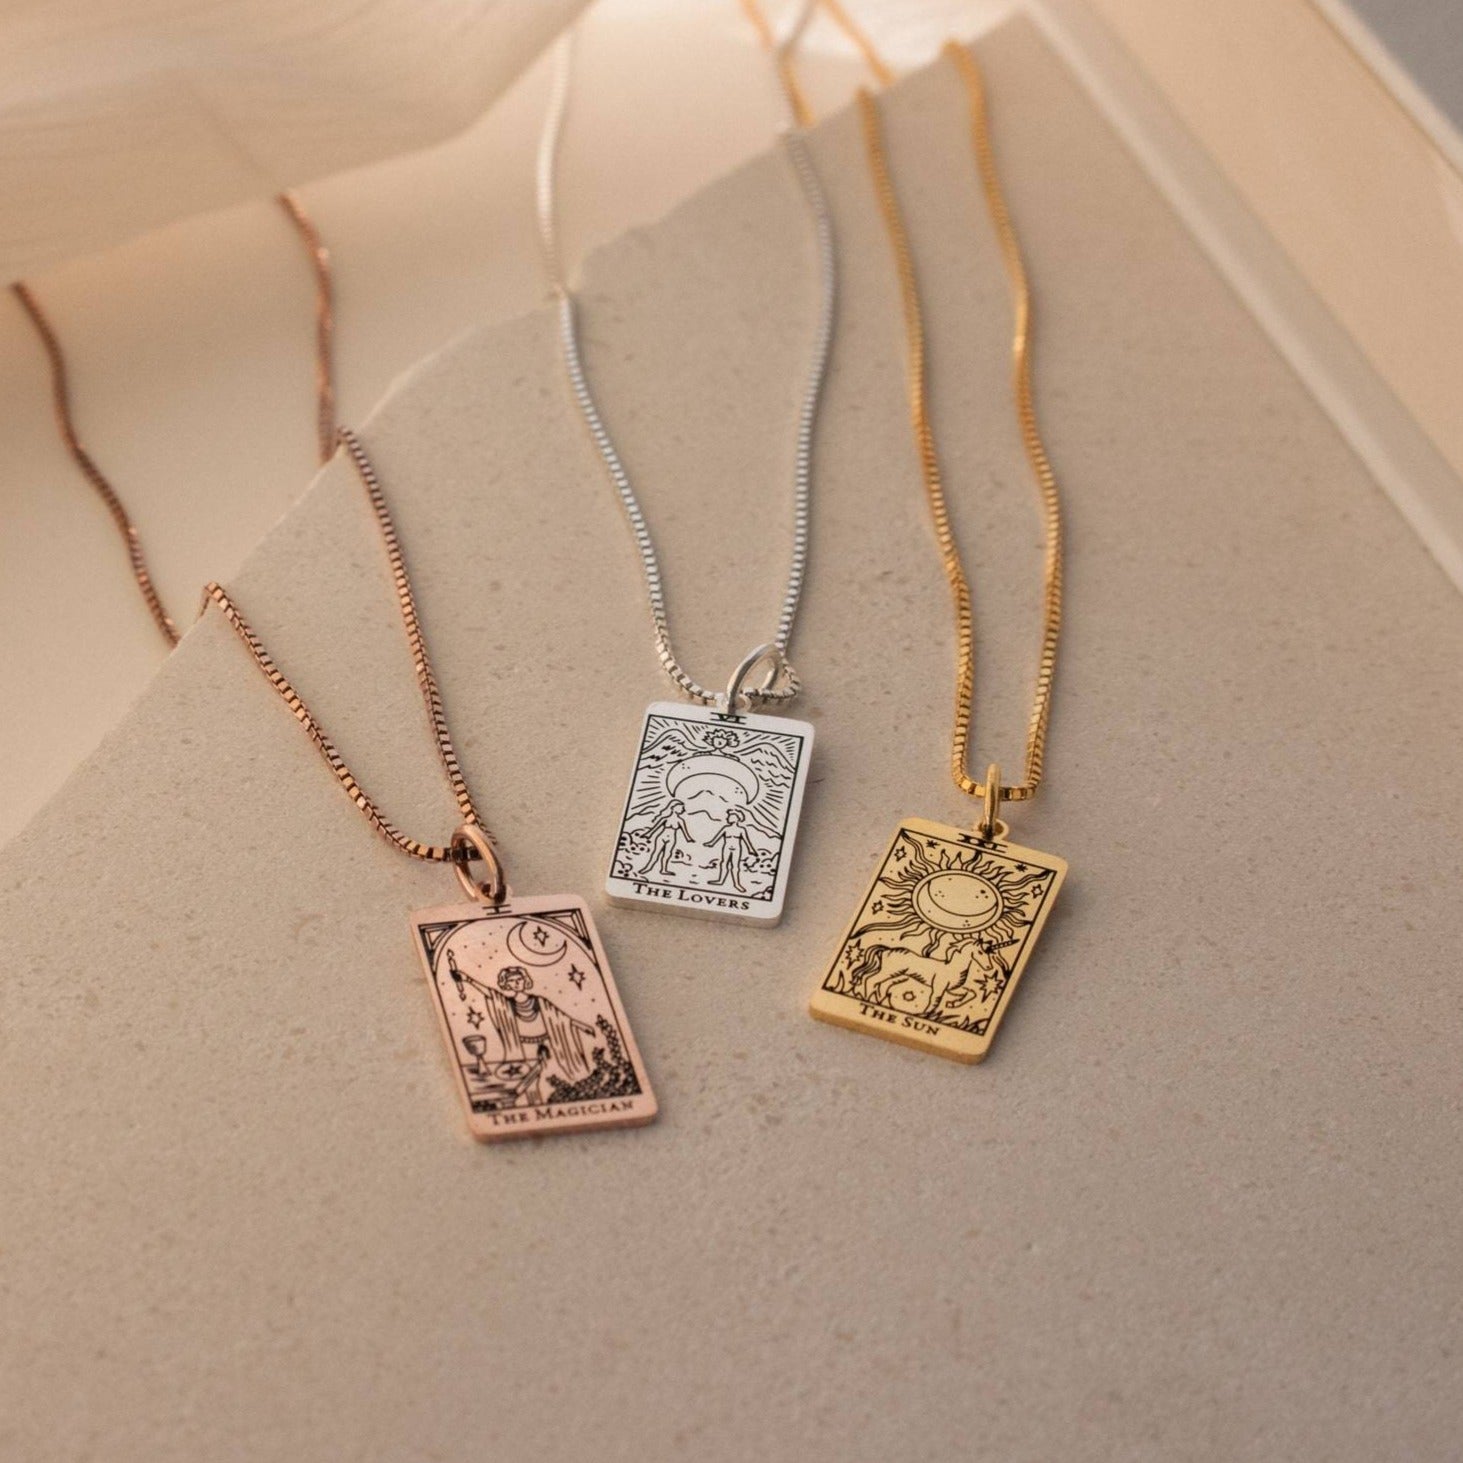 Tarot Necklace in Box Chain